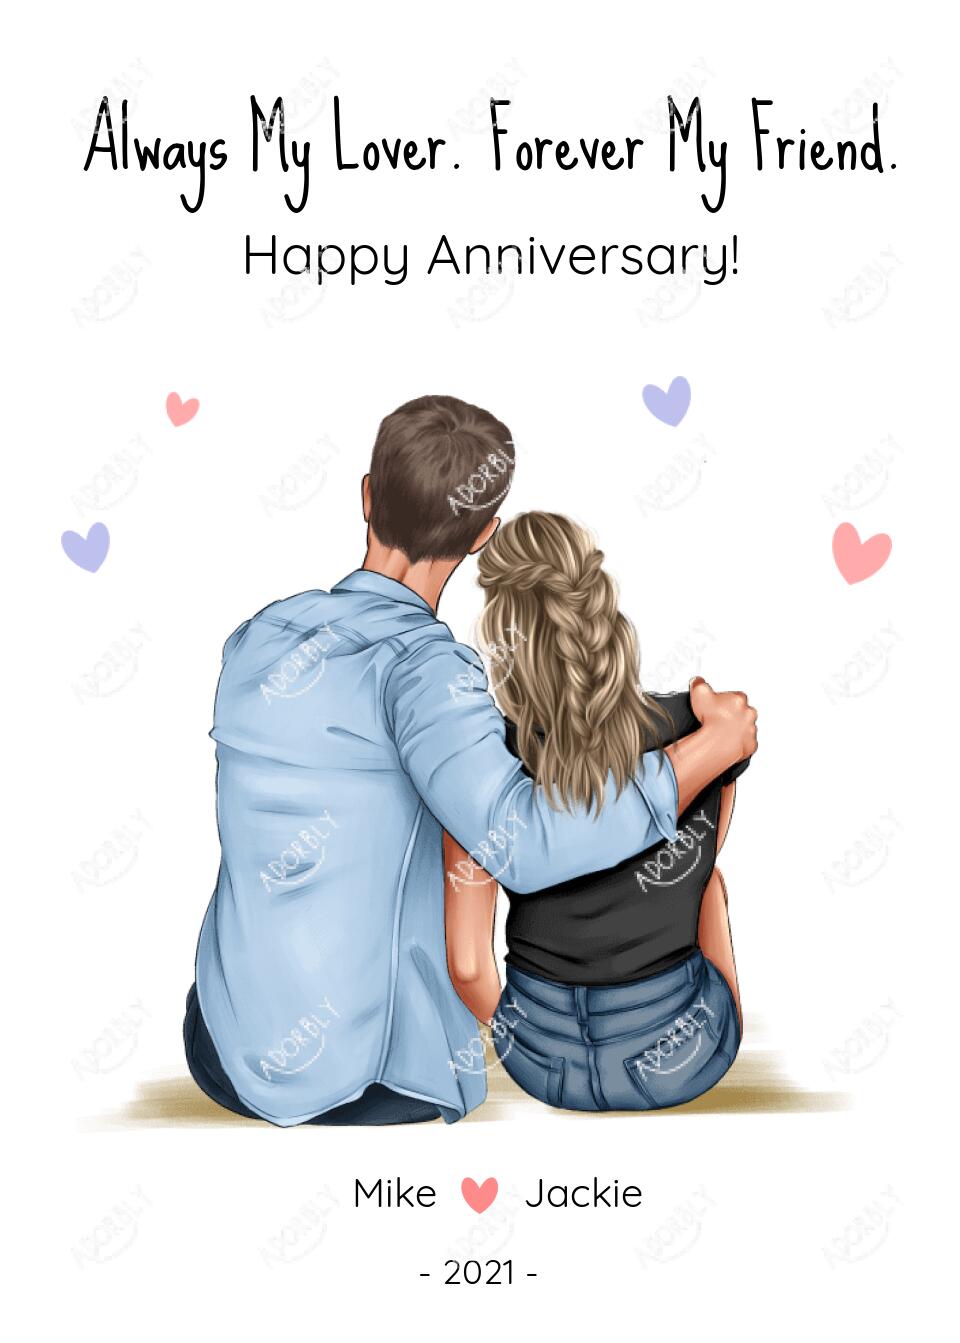 Happy Anniversary Forever My Friend - Personalized Anniversary Card